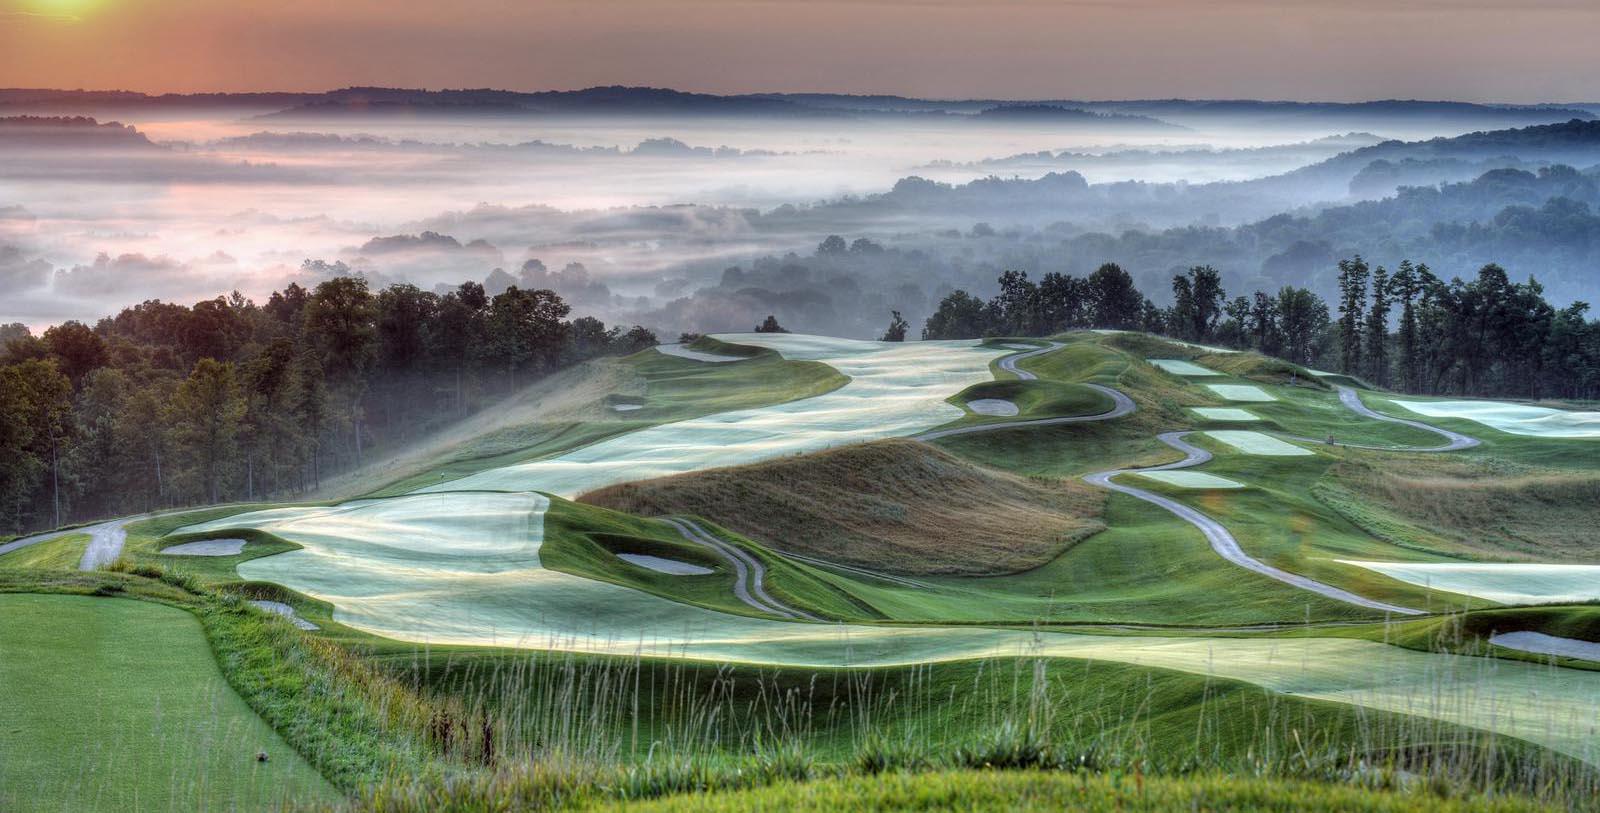 Explore nearby Pete Dye Course and play legendary golf.